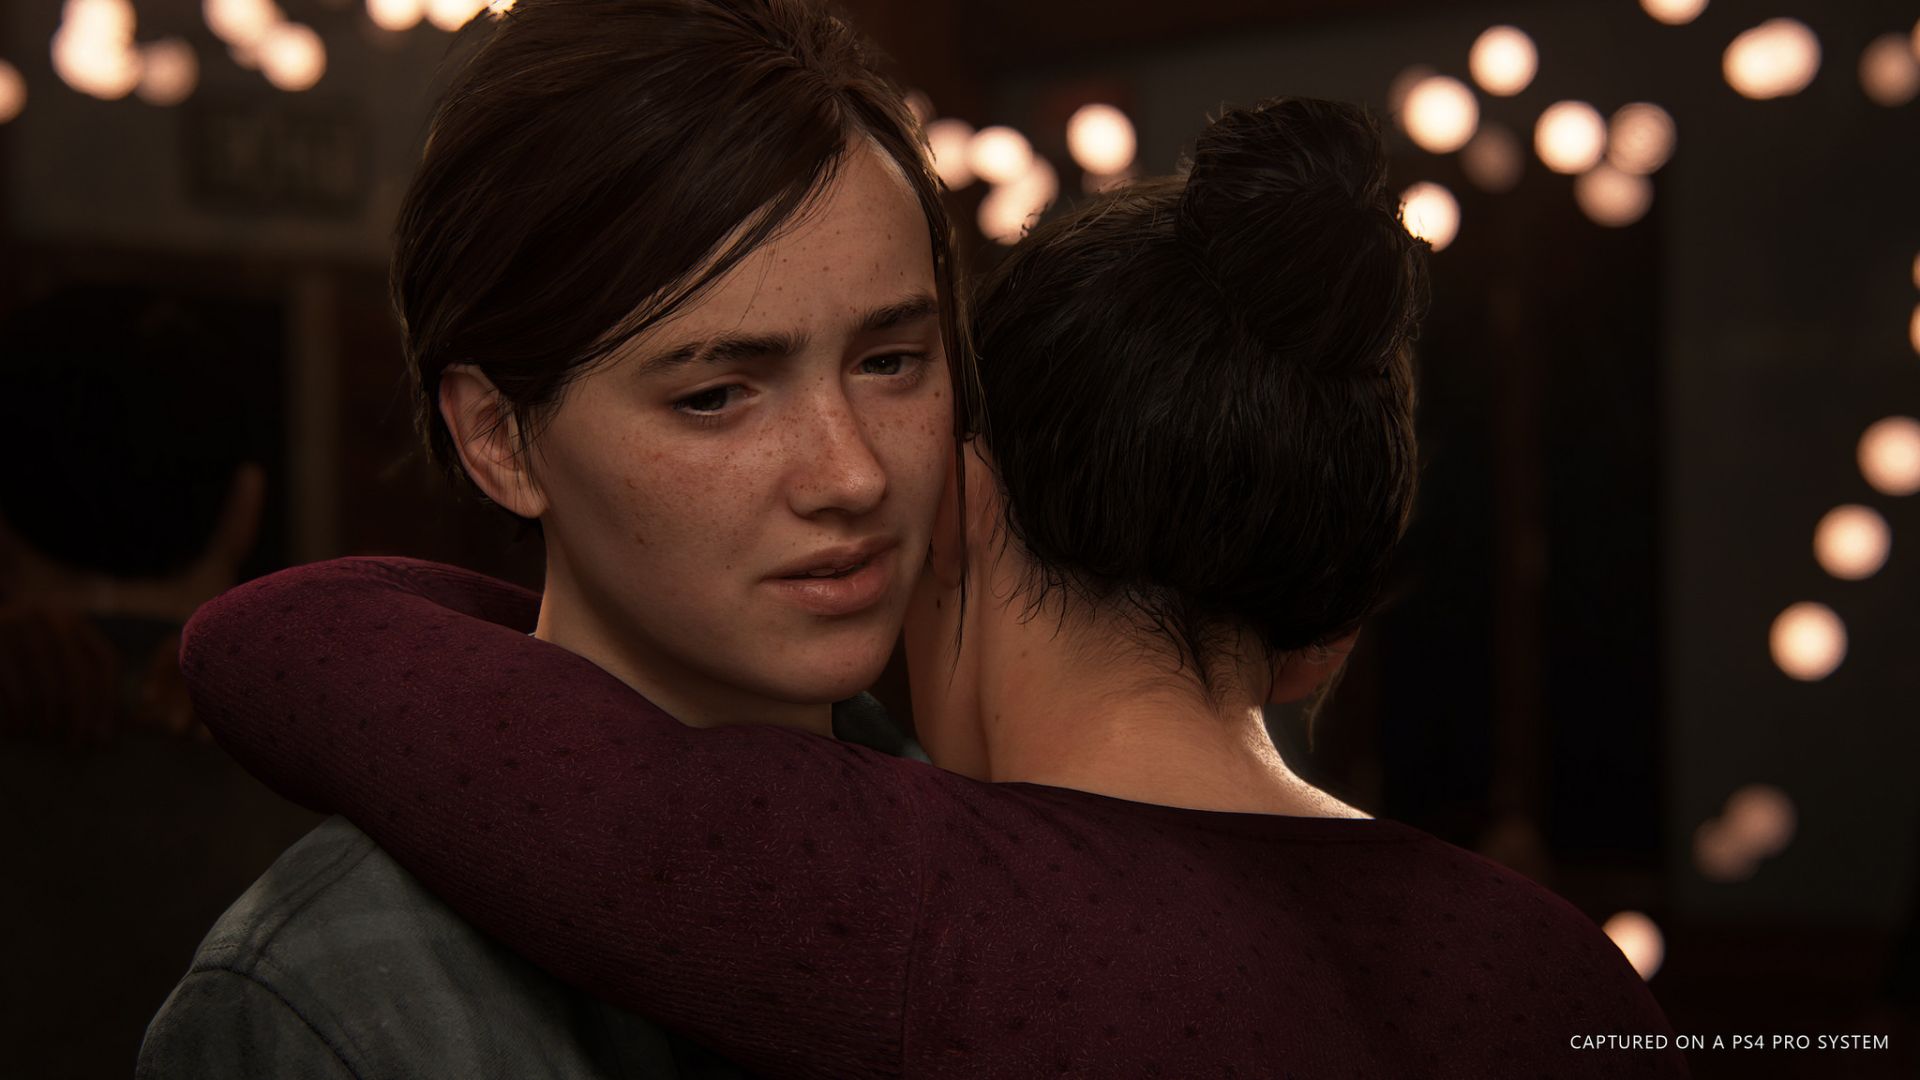 The Last of Us Part 2 Plot Details Revealed, Ellie's Mother Anna will have Important Role in Sequel